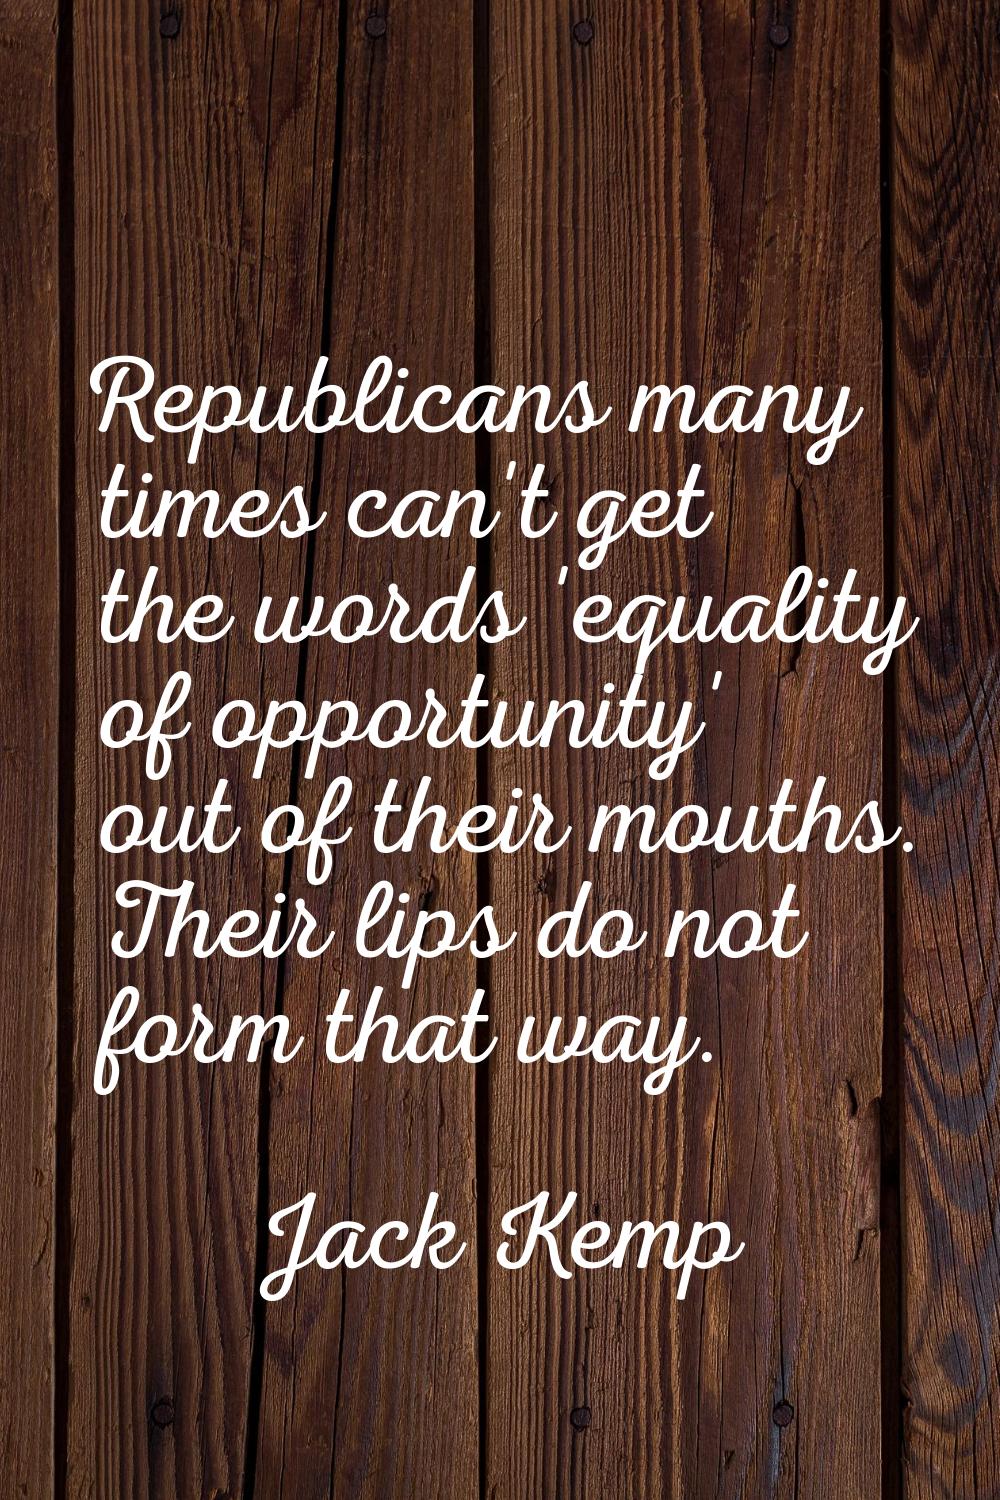 Republicans many times can't get the words 'equality of opportunity' out of their mouths. Their lip